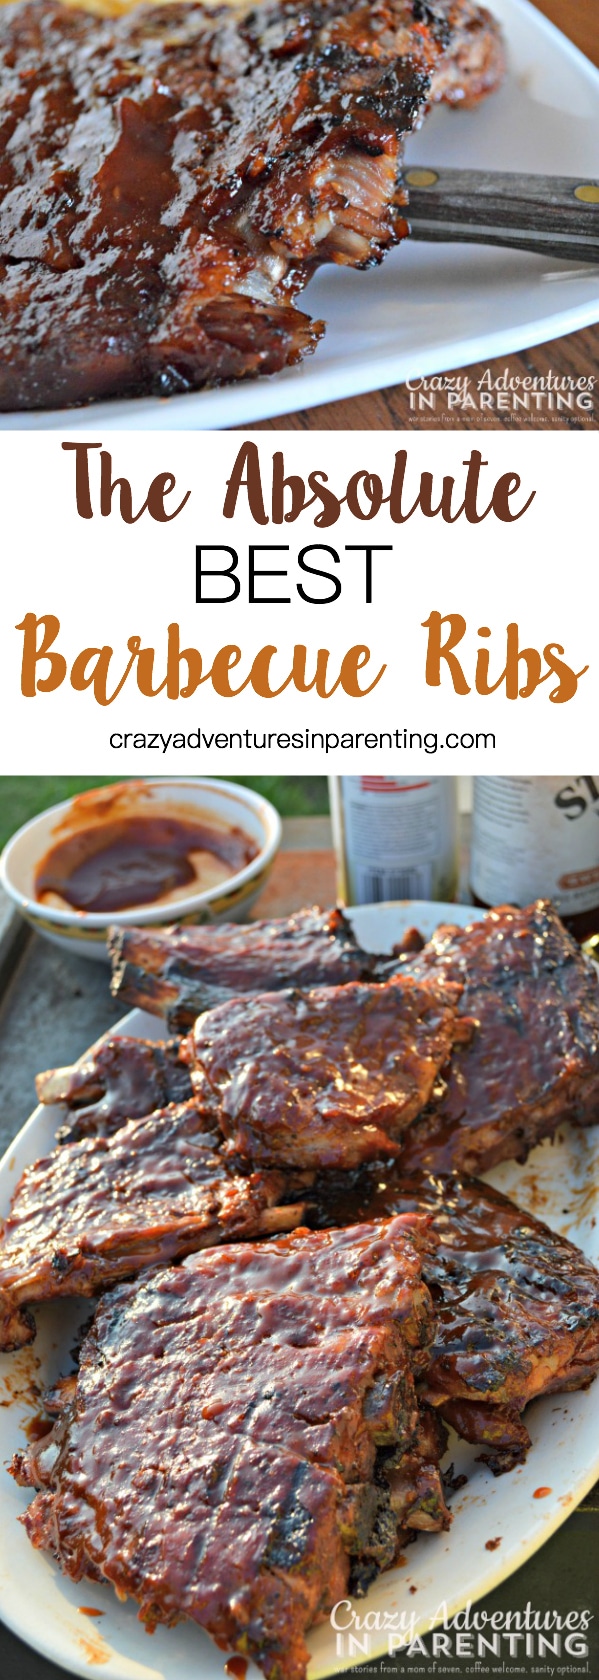 The Absolute BEST Barbecue Ribs Recipe EVER!